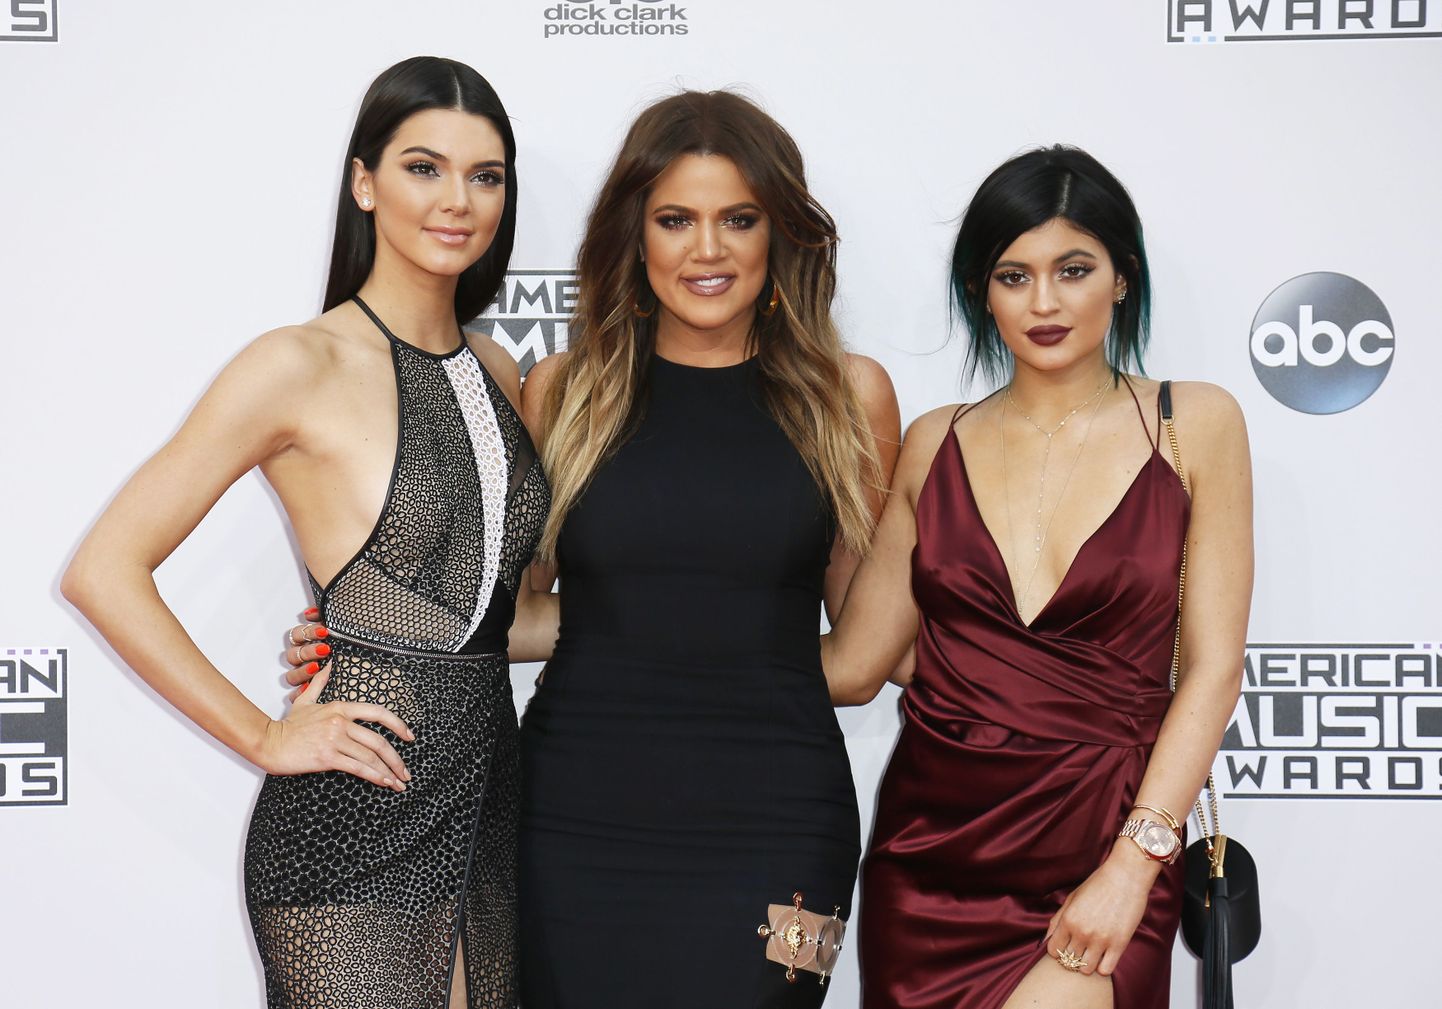 Kendall Jenner, Khloe Kardashian and Kylie Jenner arrive at the 42nd American Music Awards in Los Angeles, California November 23, 2014.  REUTERS/Danny Moloshok    (UNITED STATES-Tags: ENTERTAINMENT)(MUSIC-AMERICANMUSICAWARDS-ARRIVALS)